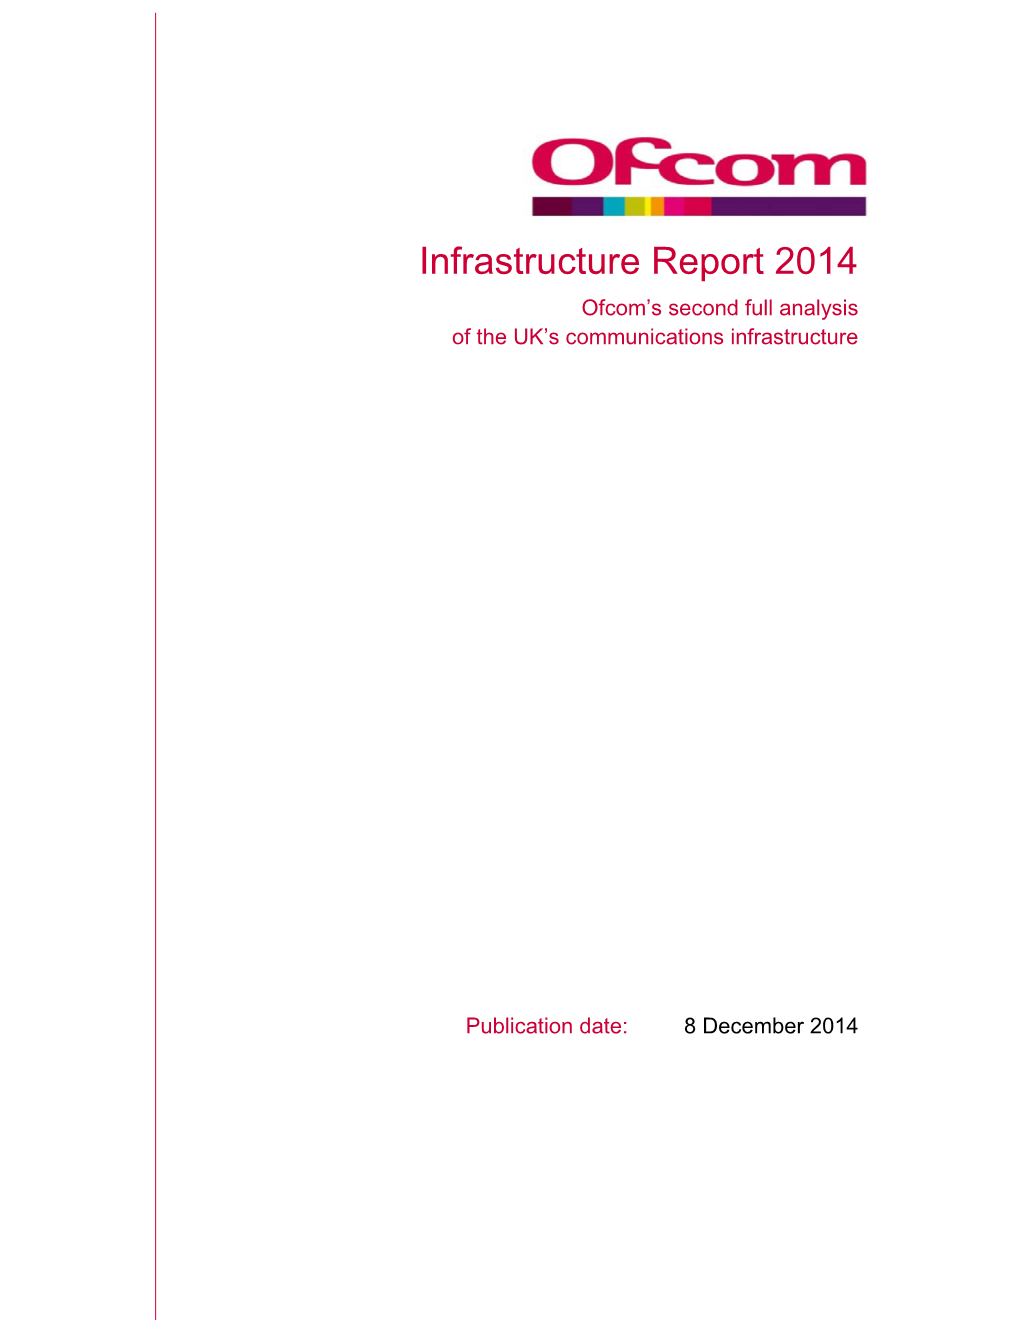 Infrastructure Report 2014 Ofcom’S Second Full Analysis of the UK’S Communications Infrastructure